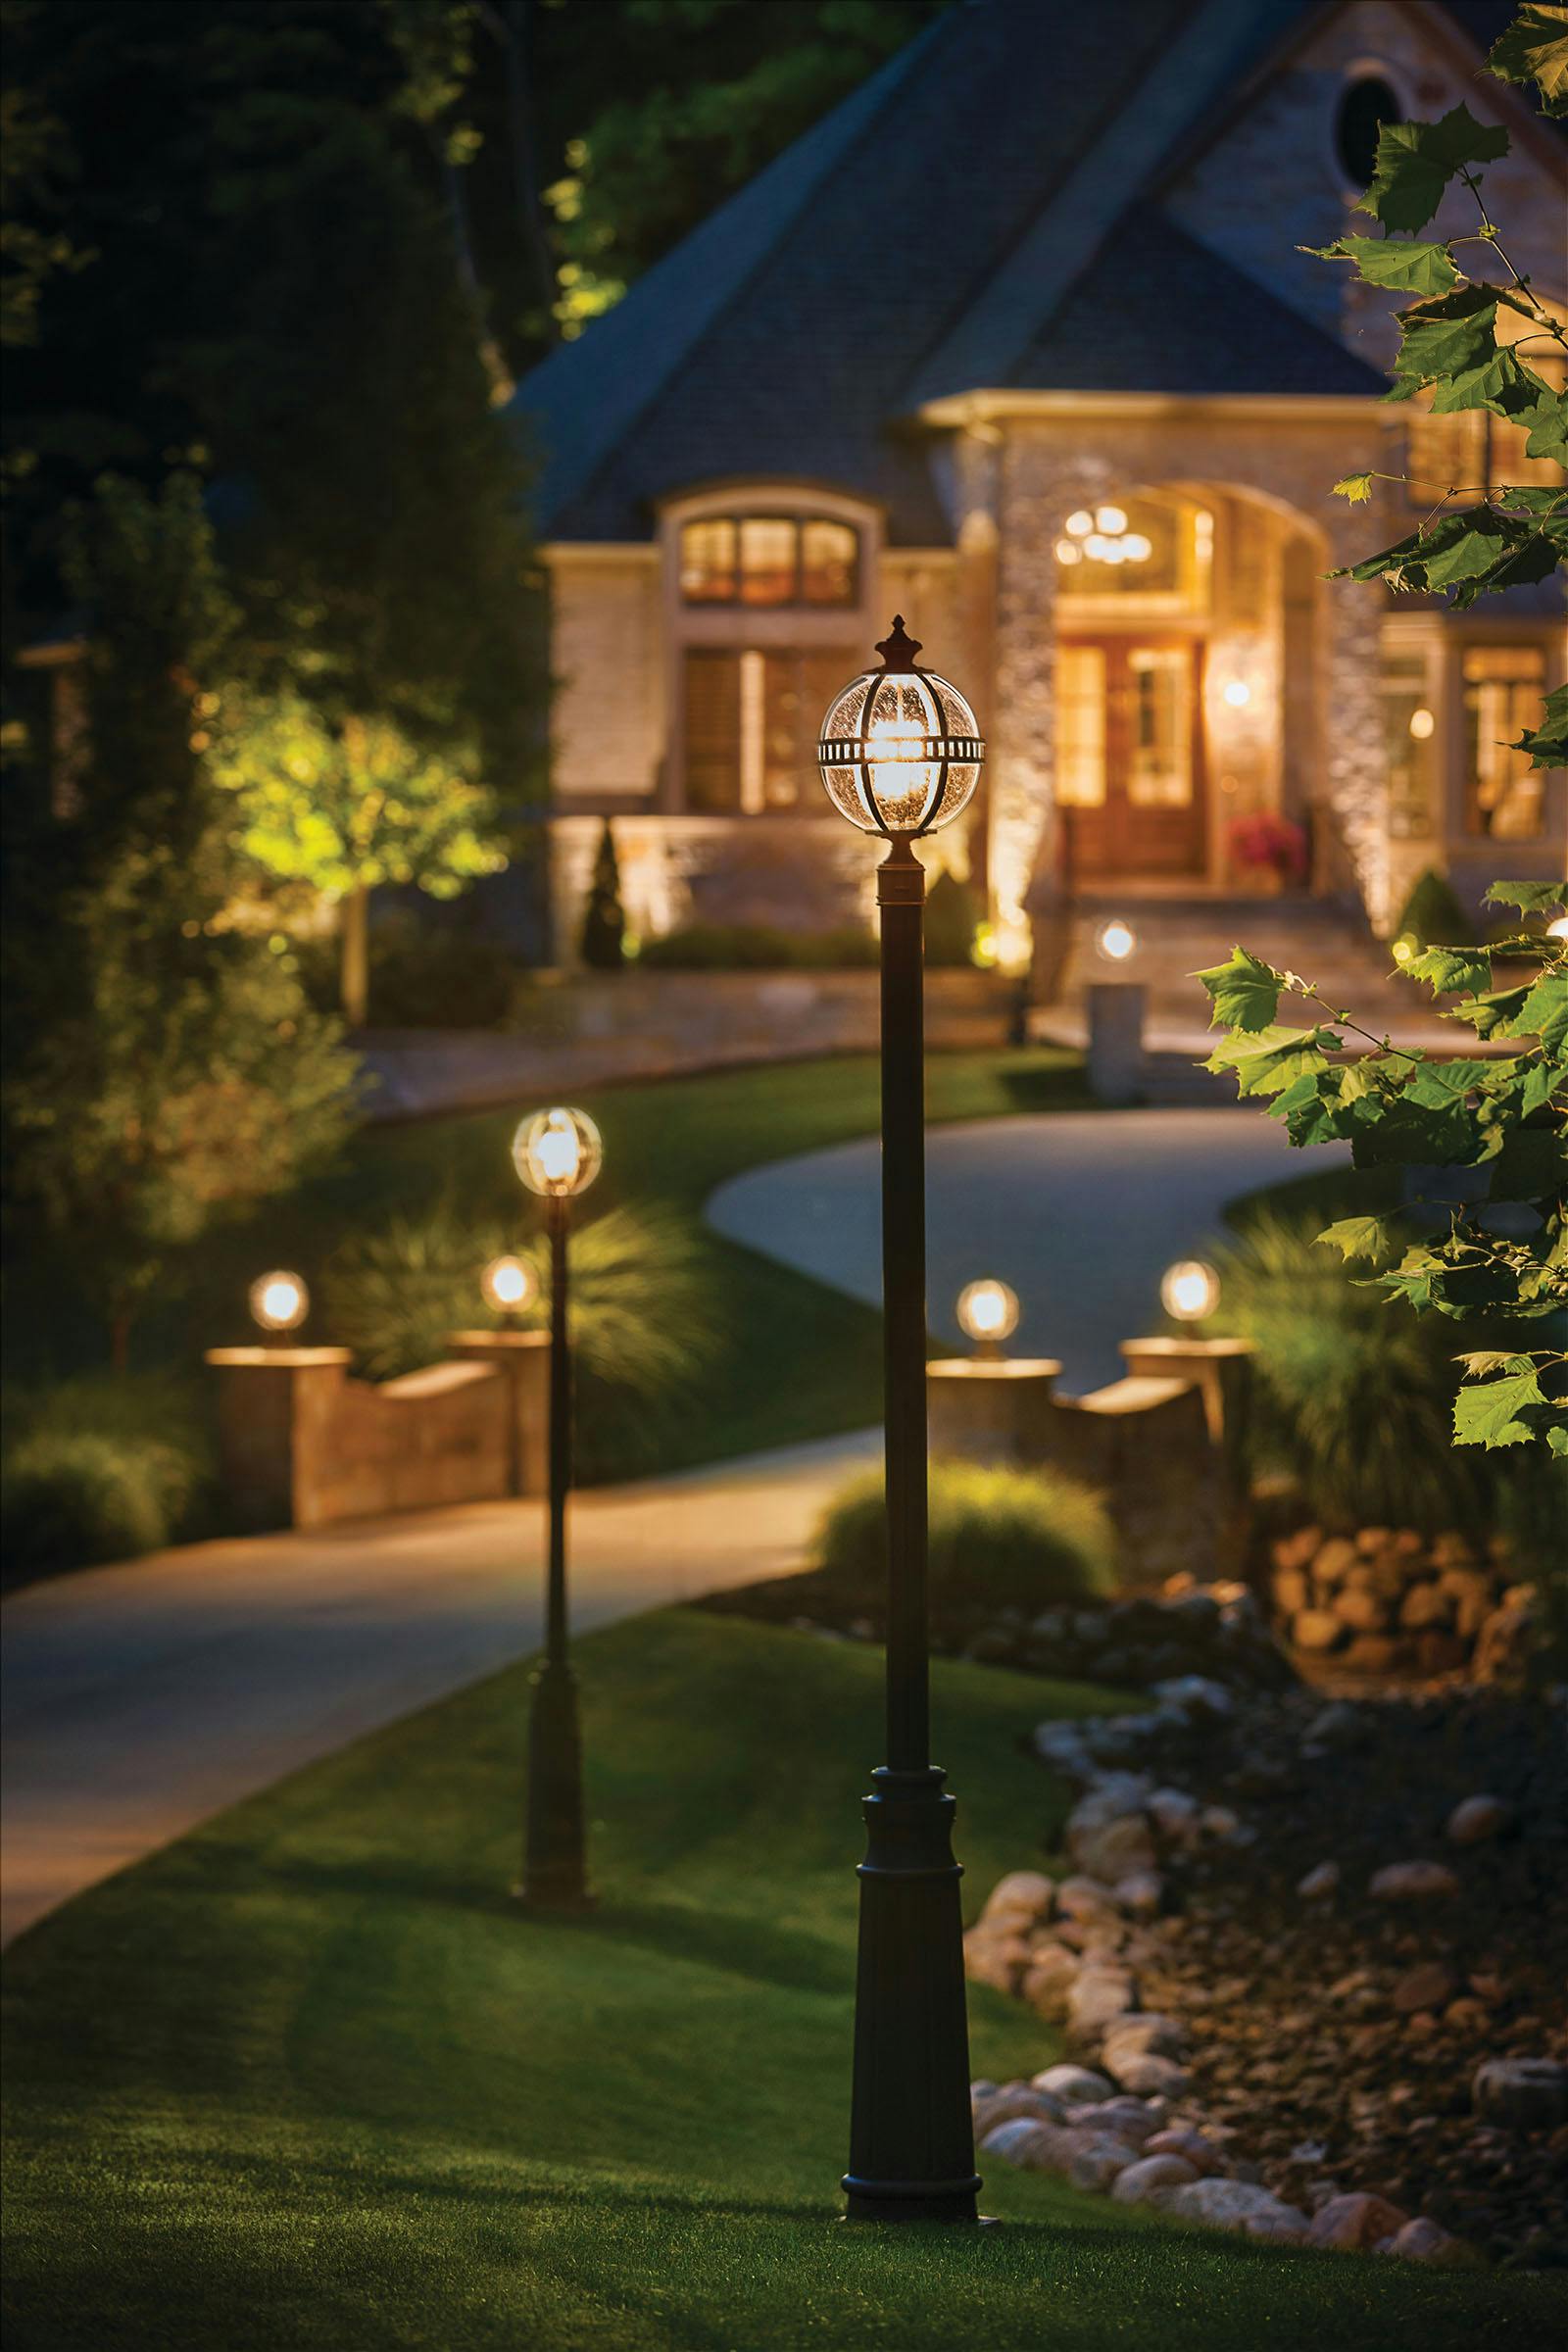 Night time driveway flanked by Halleron post lights and an illuminated home in the background